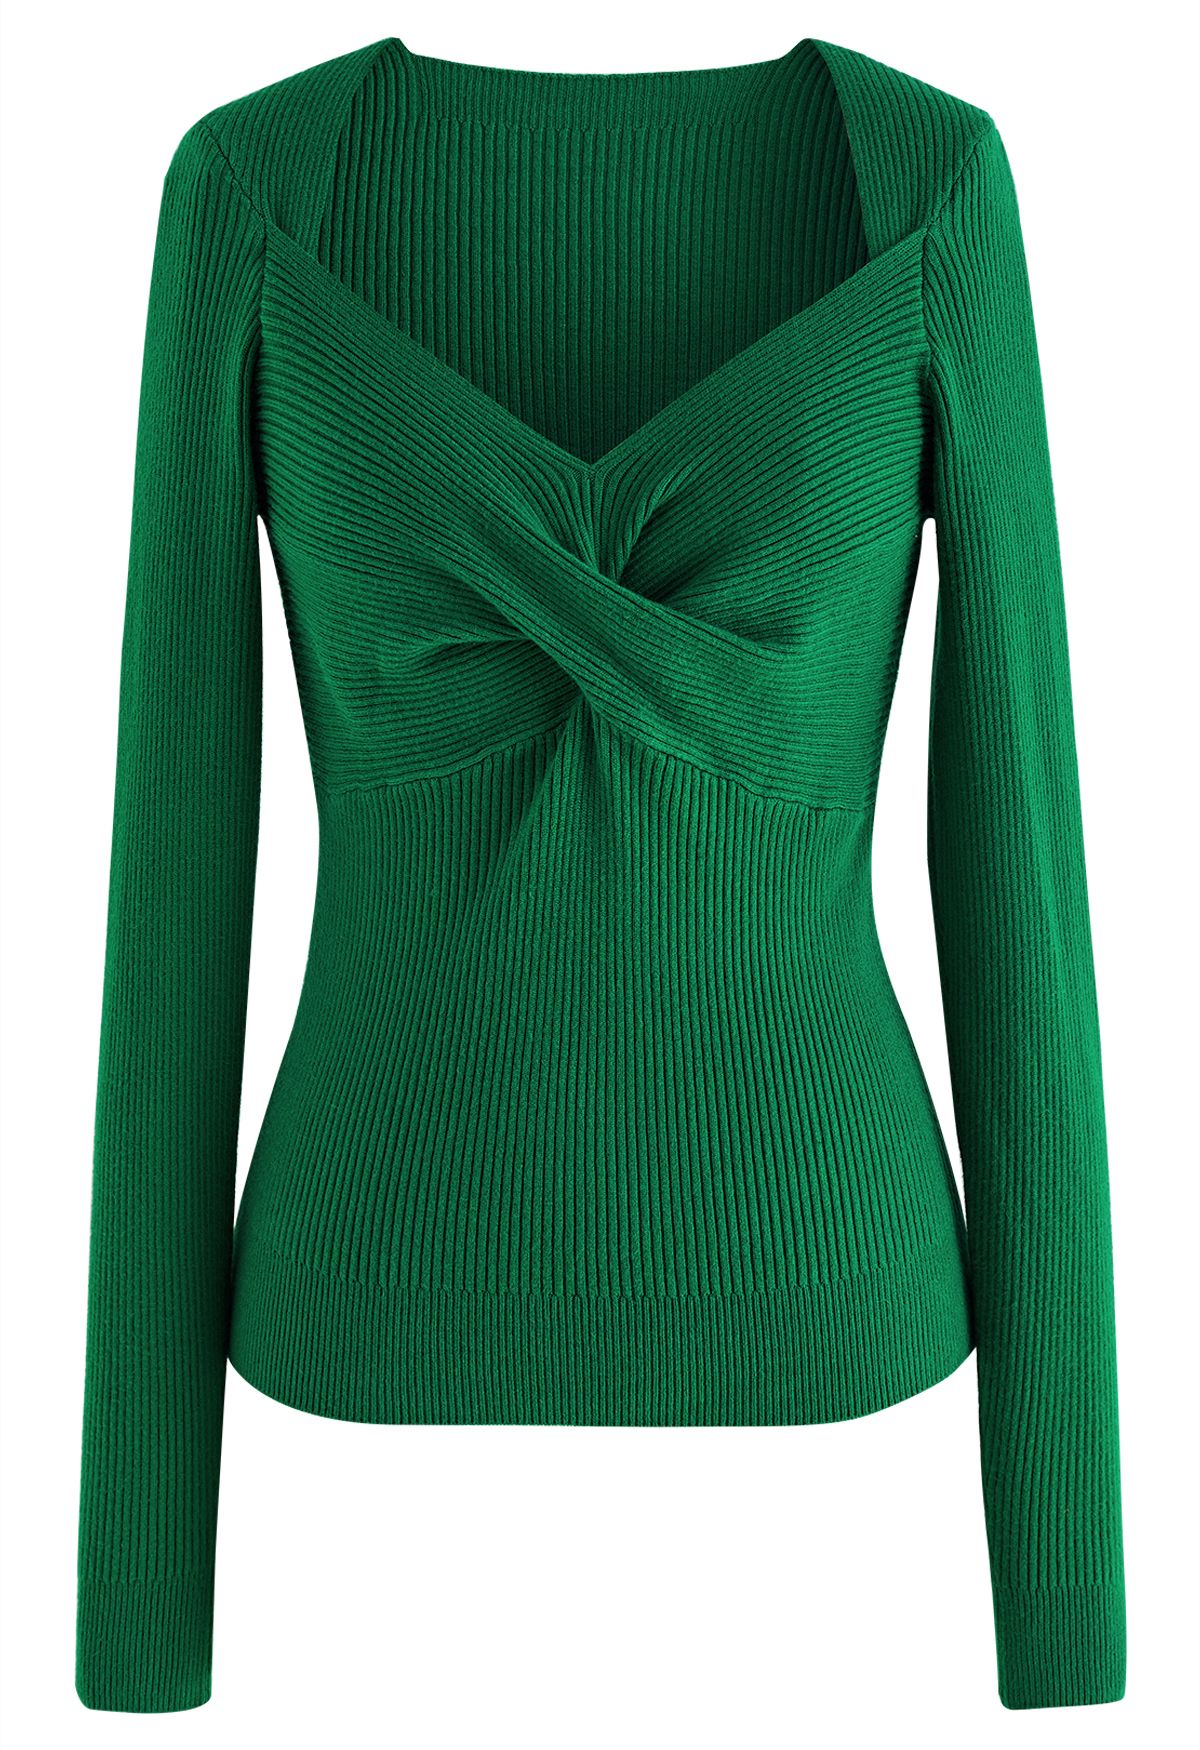 Sweetheart Twist Front Ribbed Knit Top in Green - Retro, Indie and ...